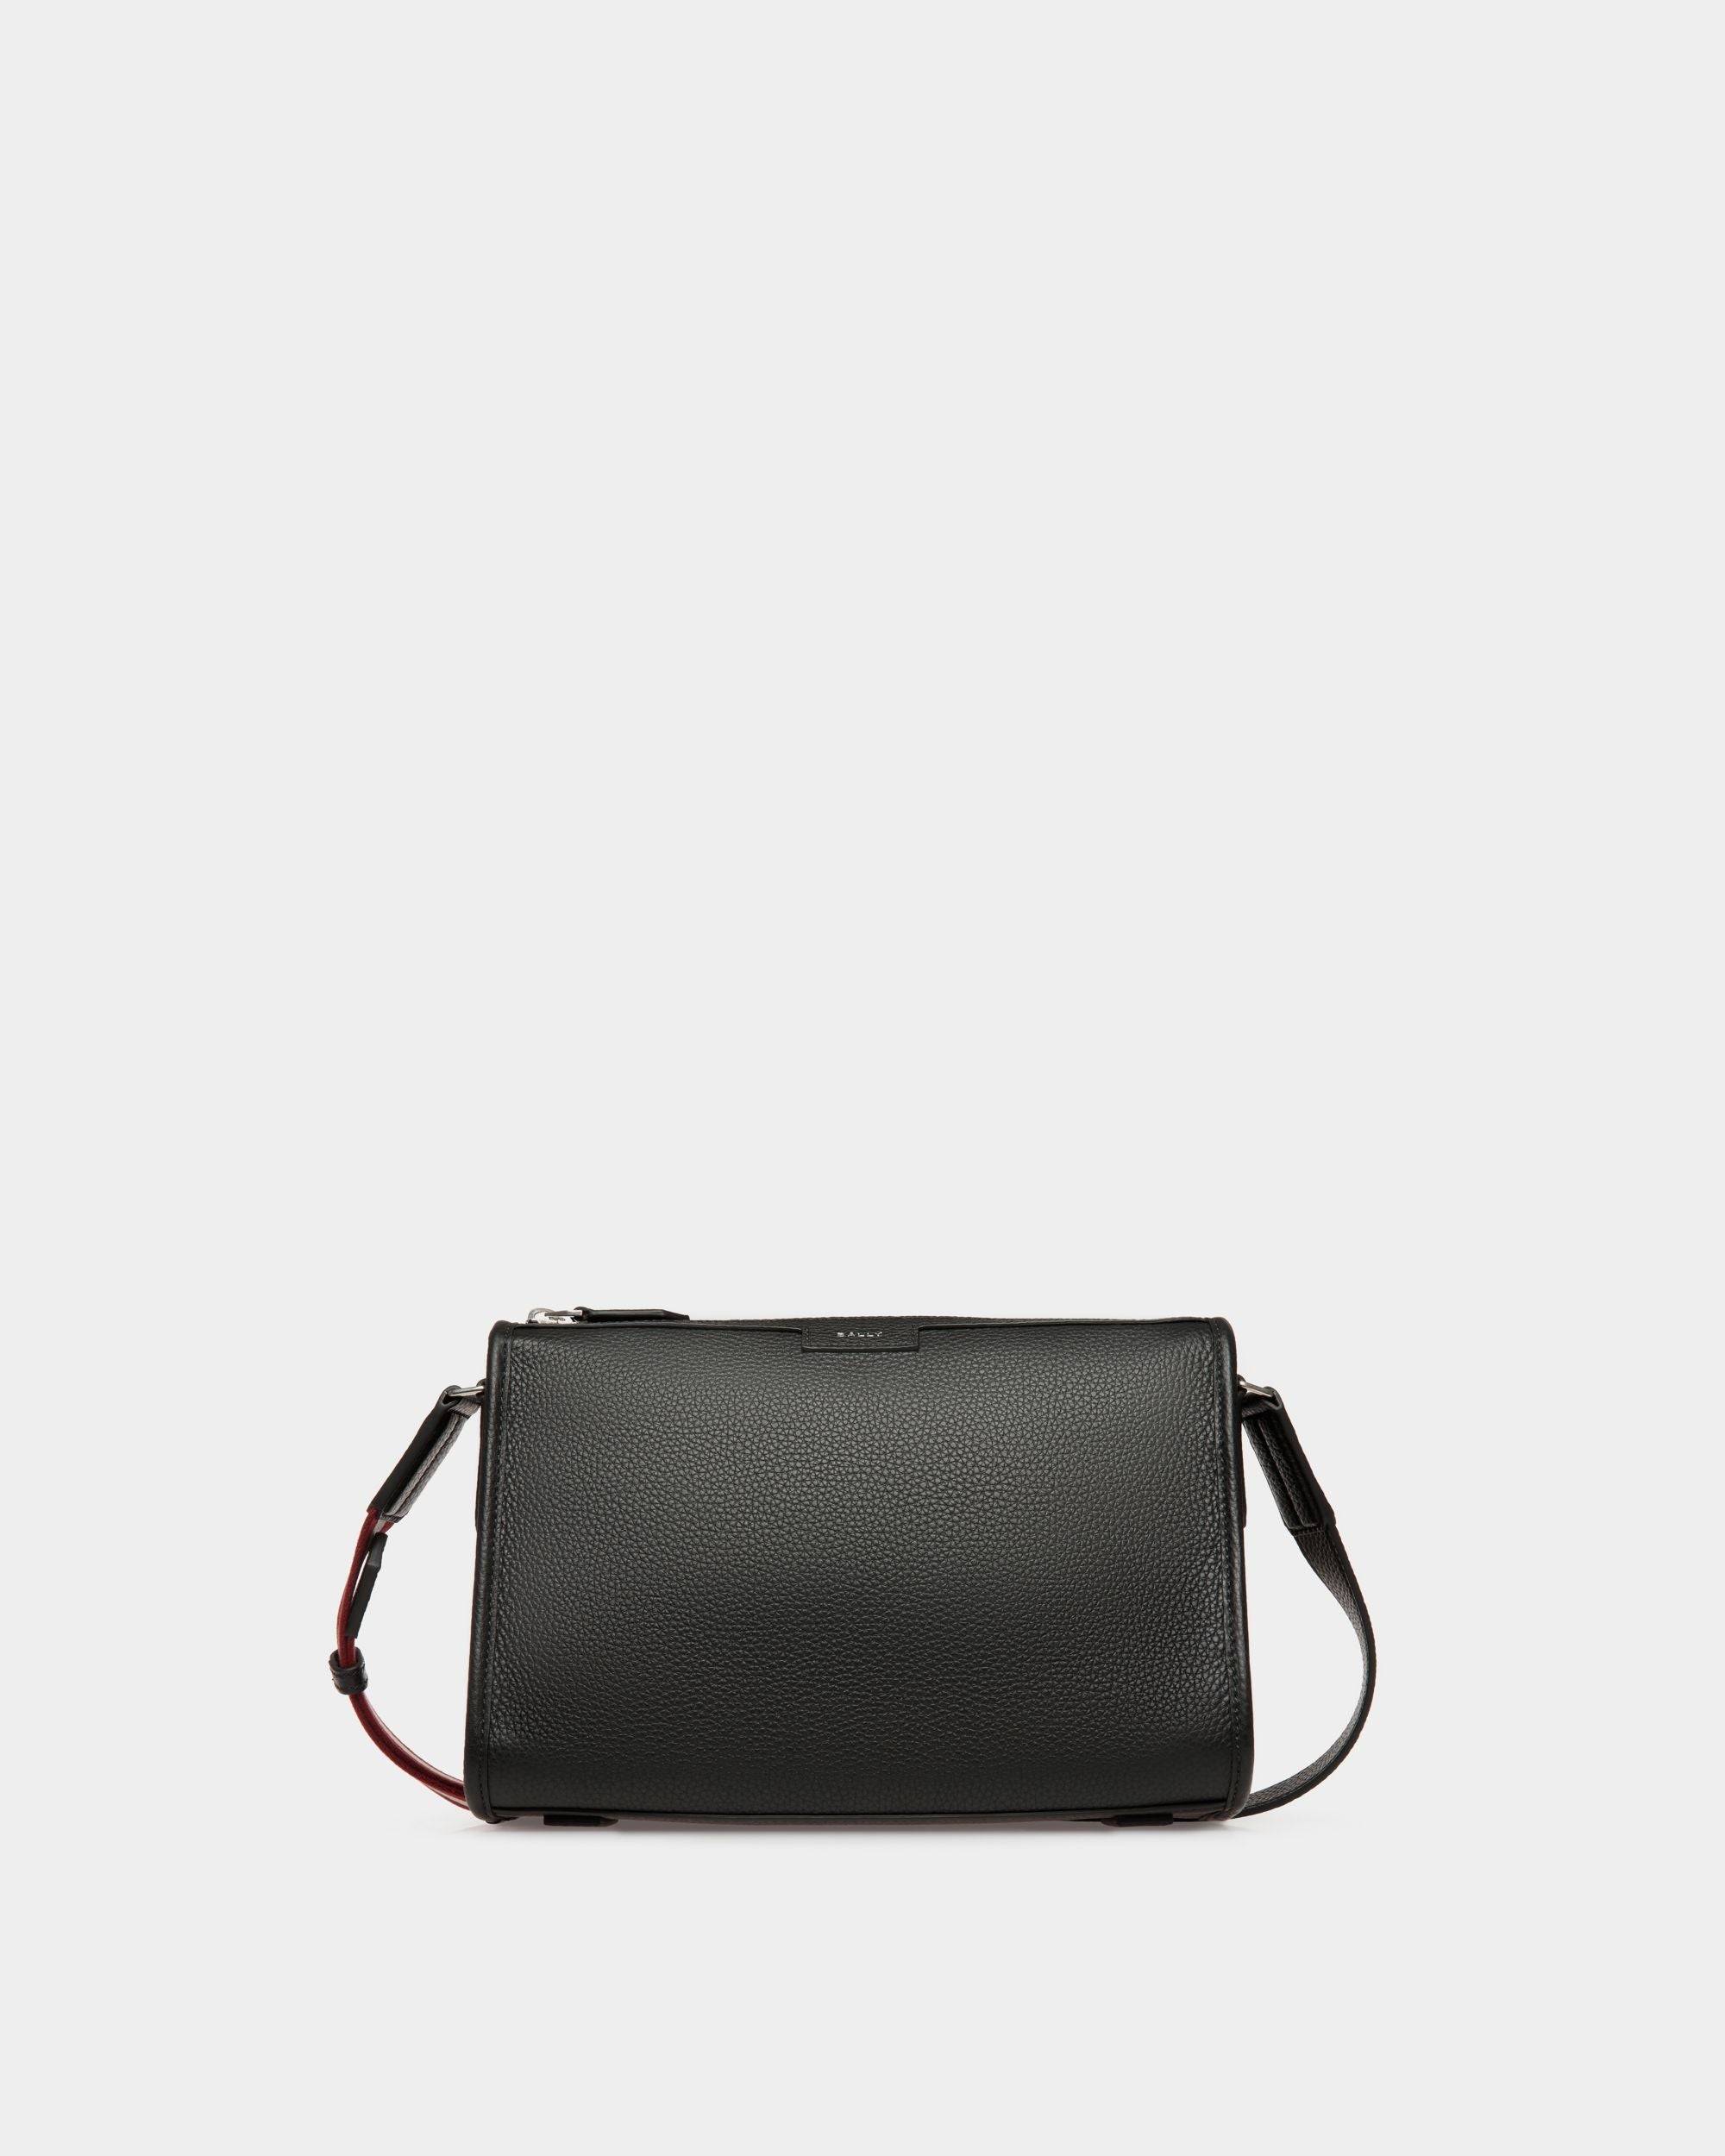 Men's Code Small Messenger Bag in Black Grained Leather | Bally | Still Life Front